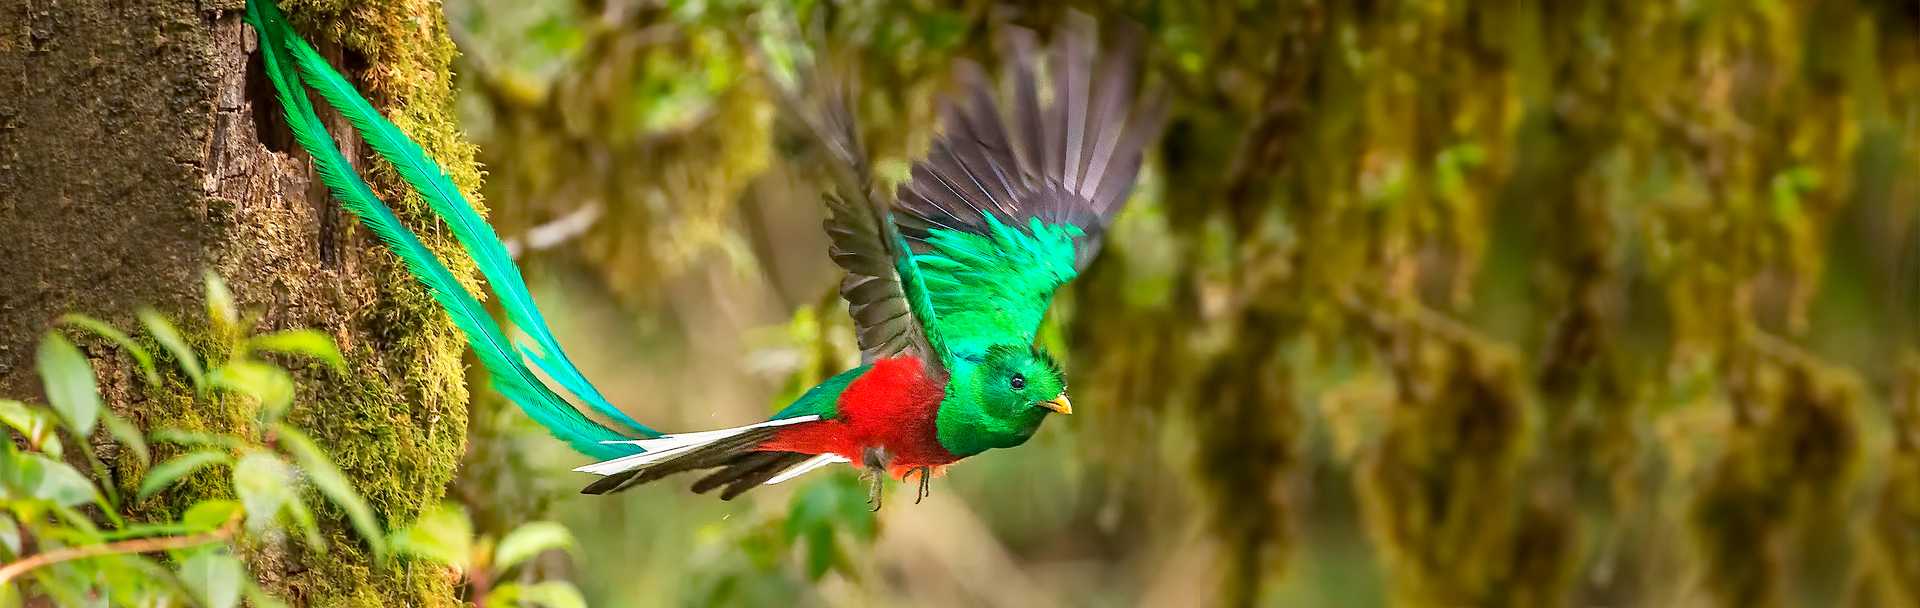 Male Resplendent Quetzal in Flight spotted in Costa Rica.